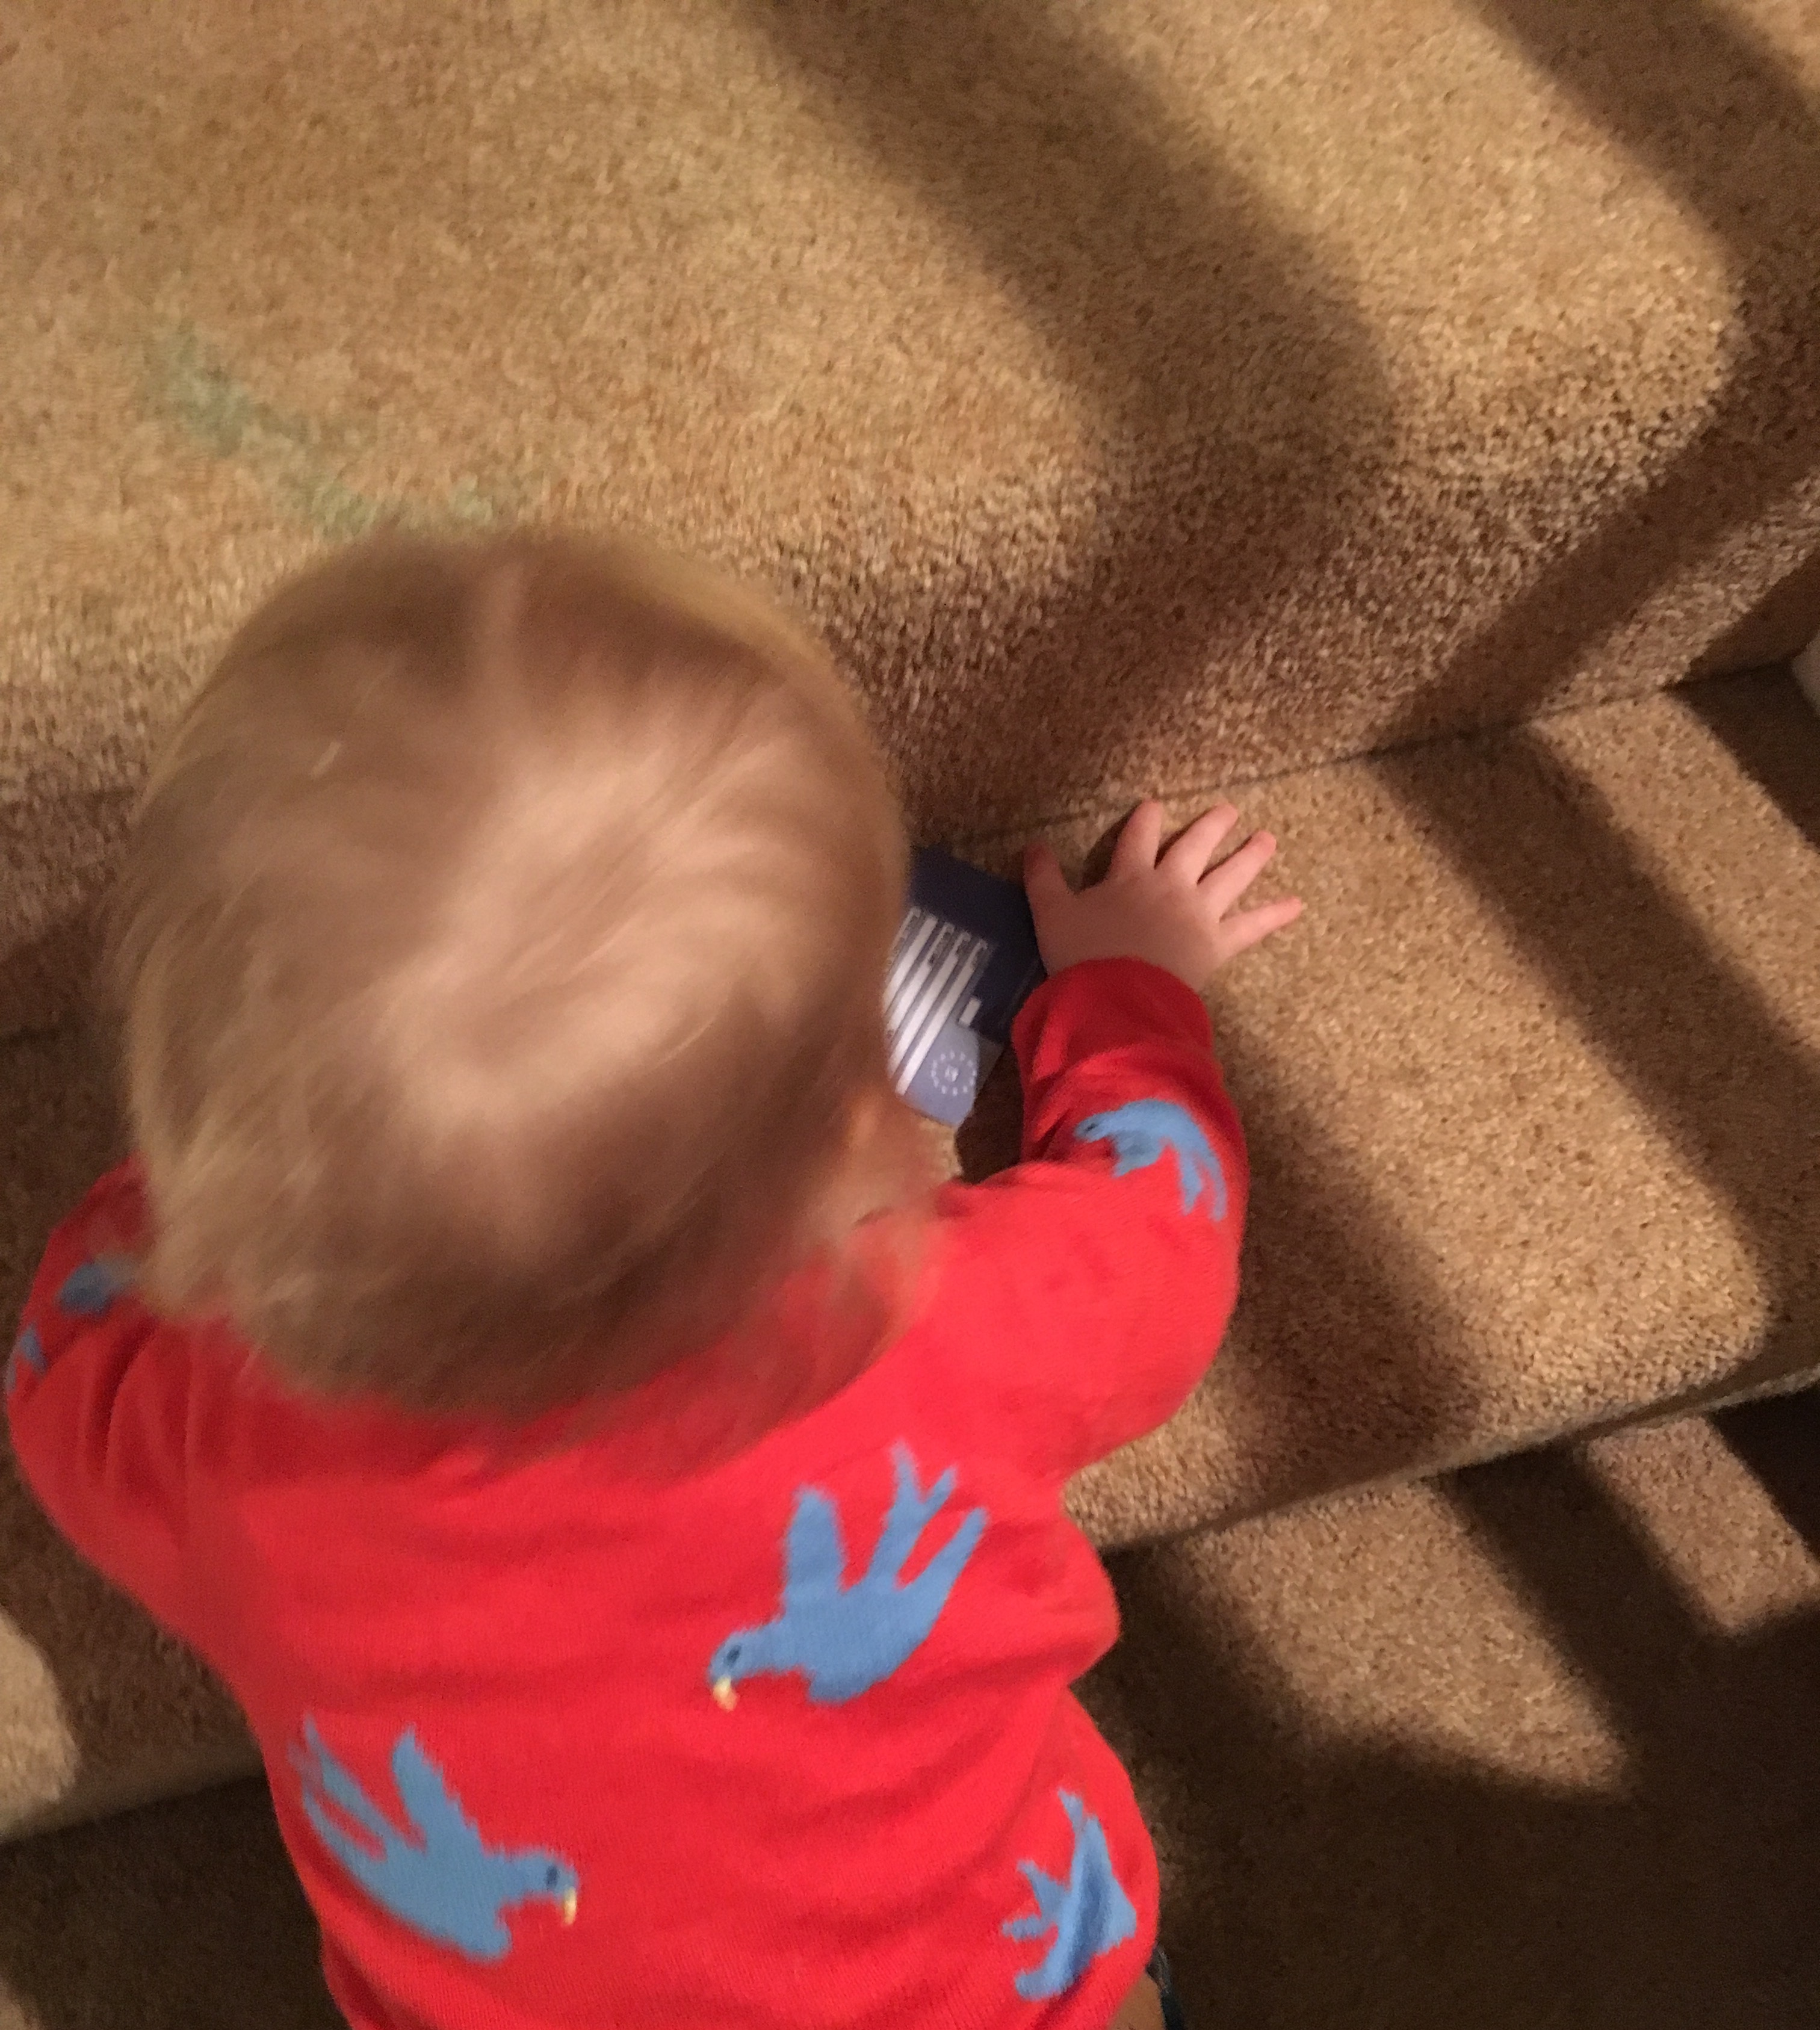 A toddler climbs stairs while she plays with a blue card